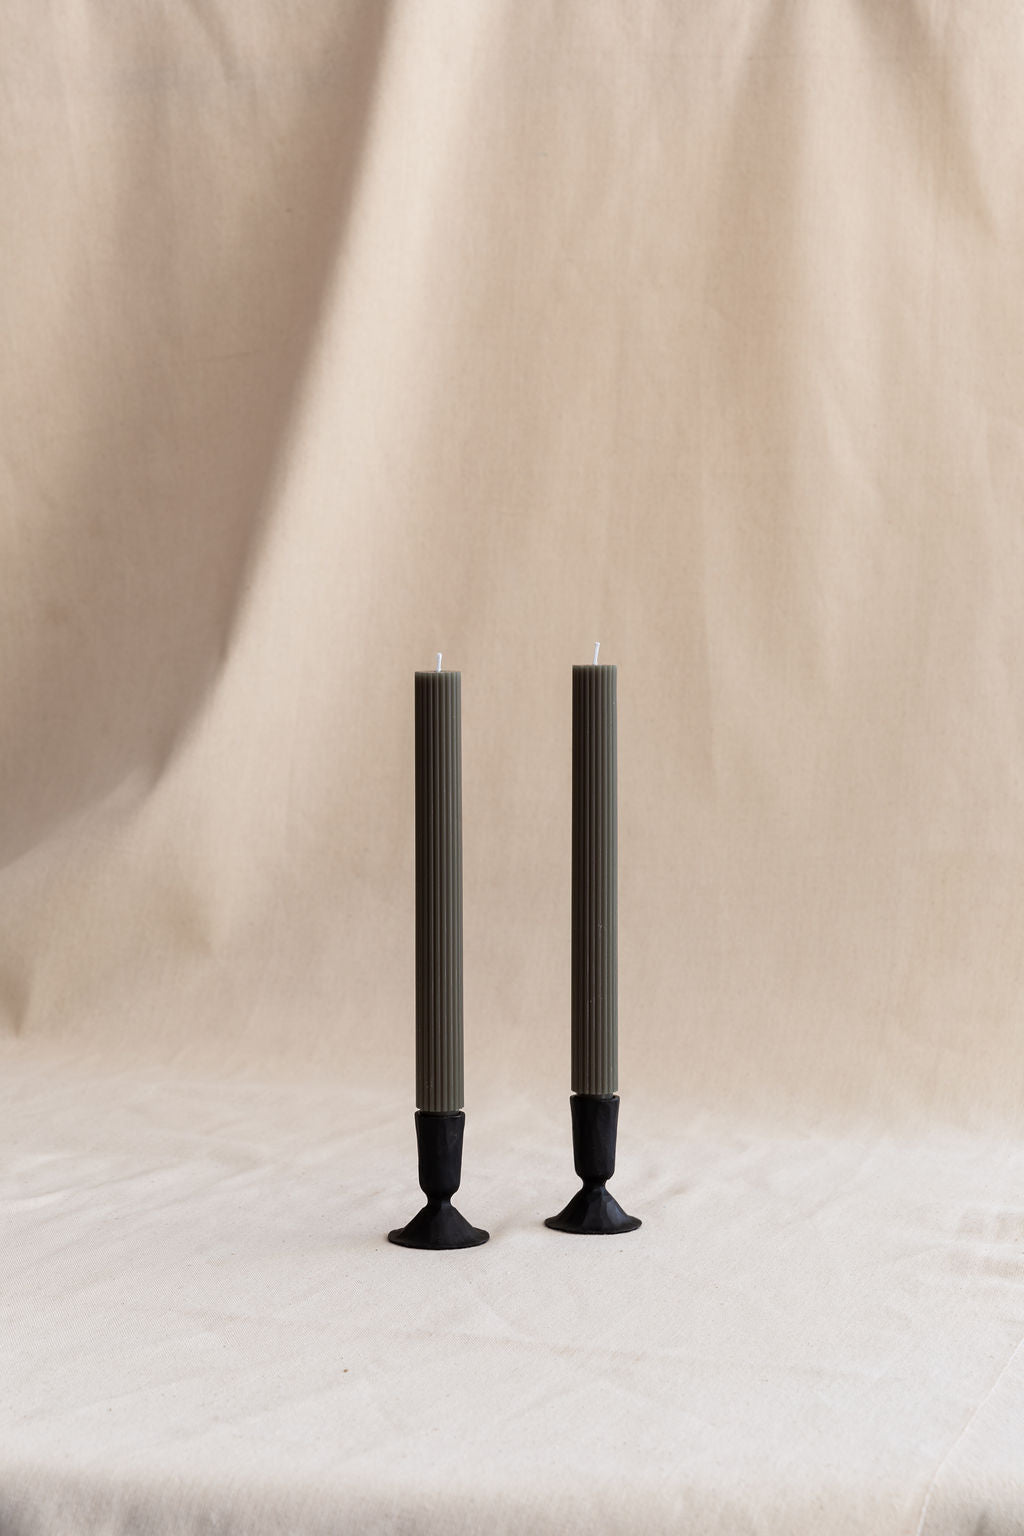 Fancy Ribbed Candle Tapers